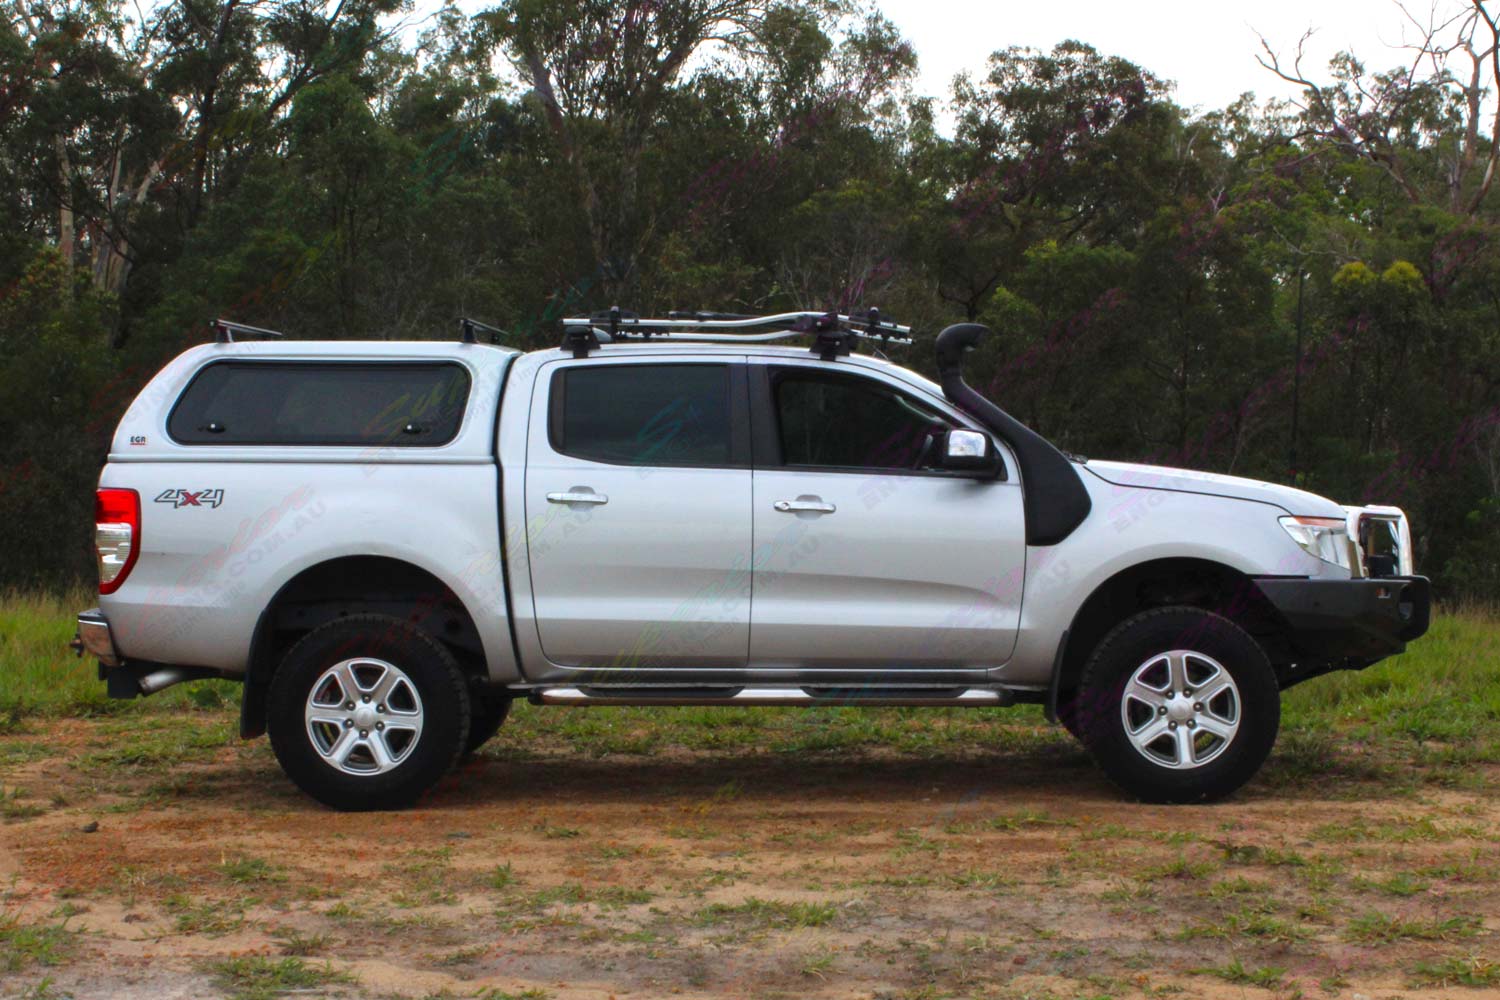 Right side view of a Silver PX Ford Ranger fitted with a range of Superior and Ironman 4x4 accessories